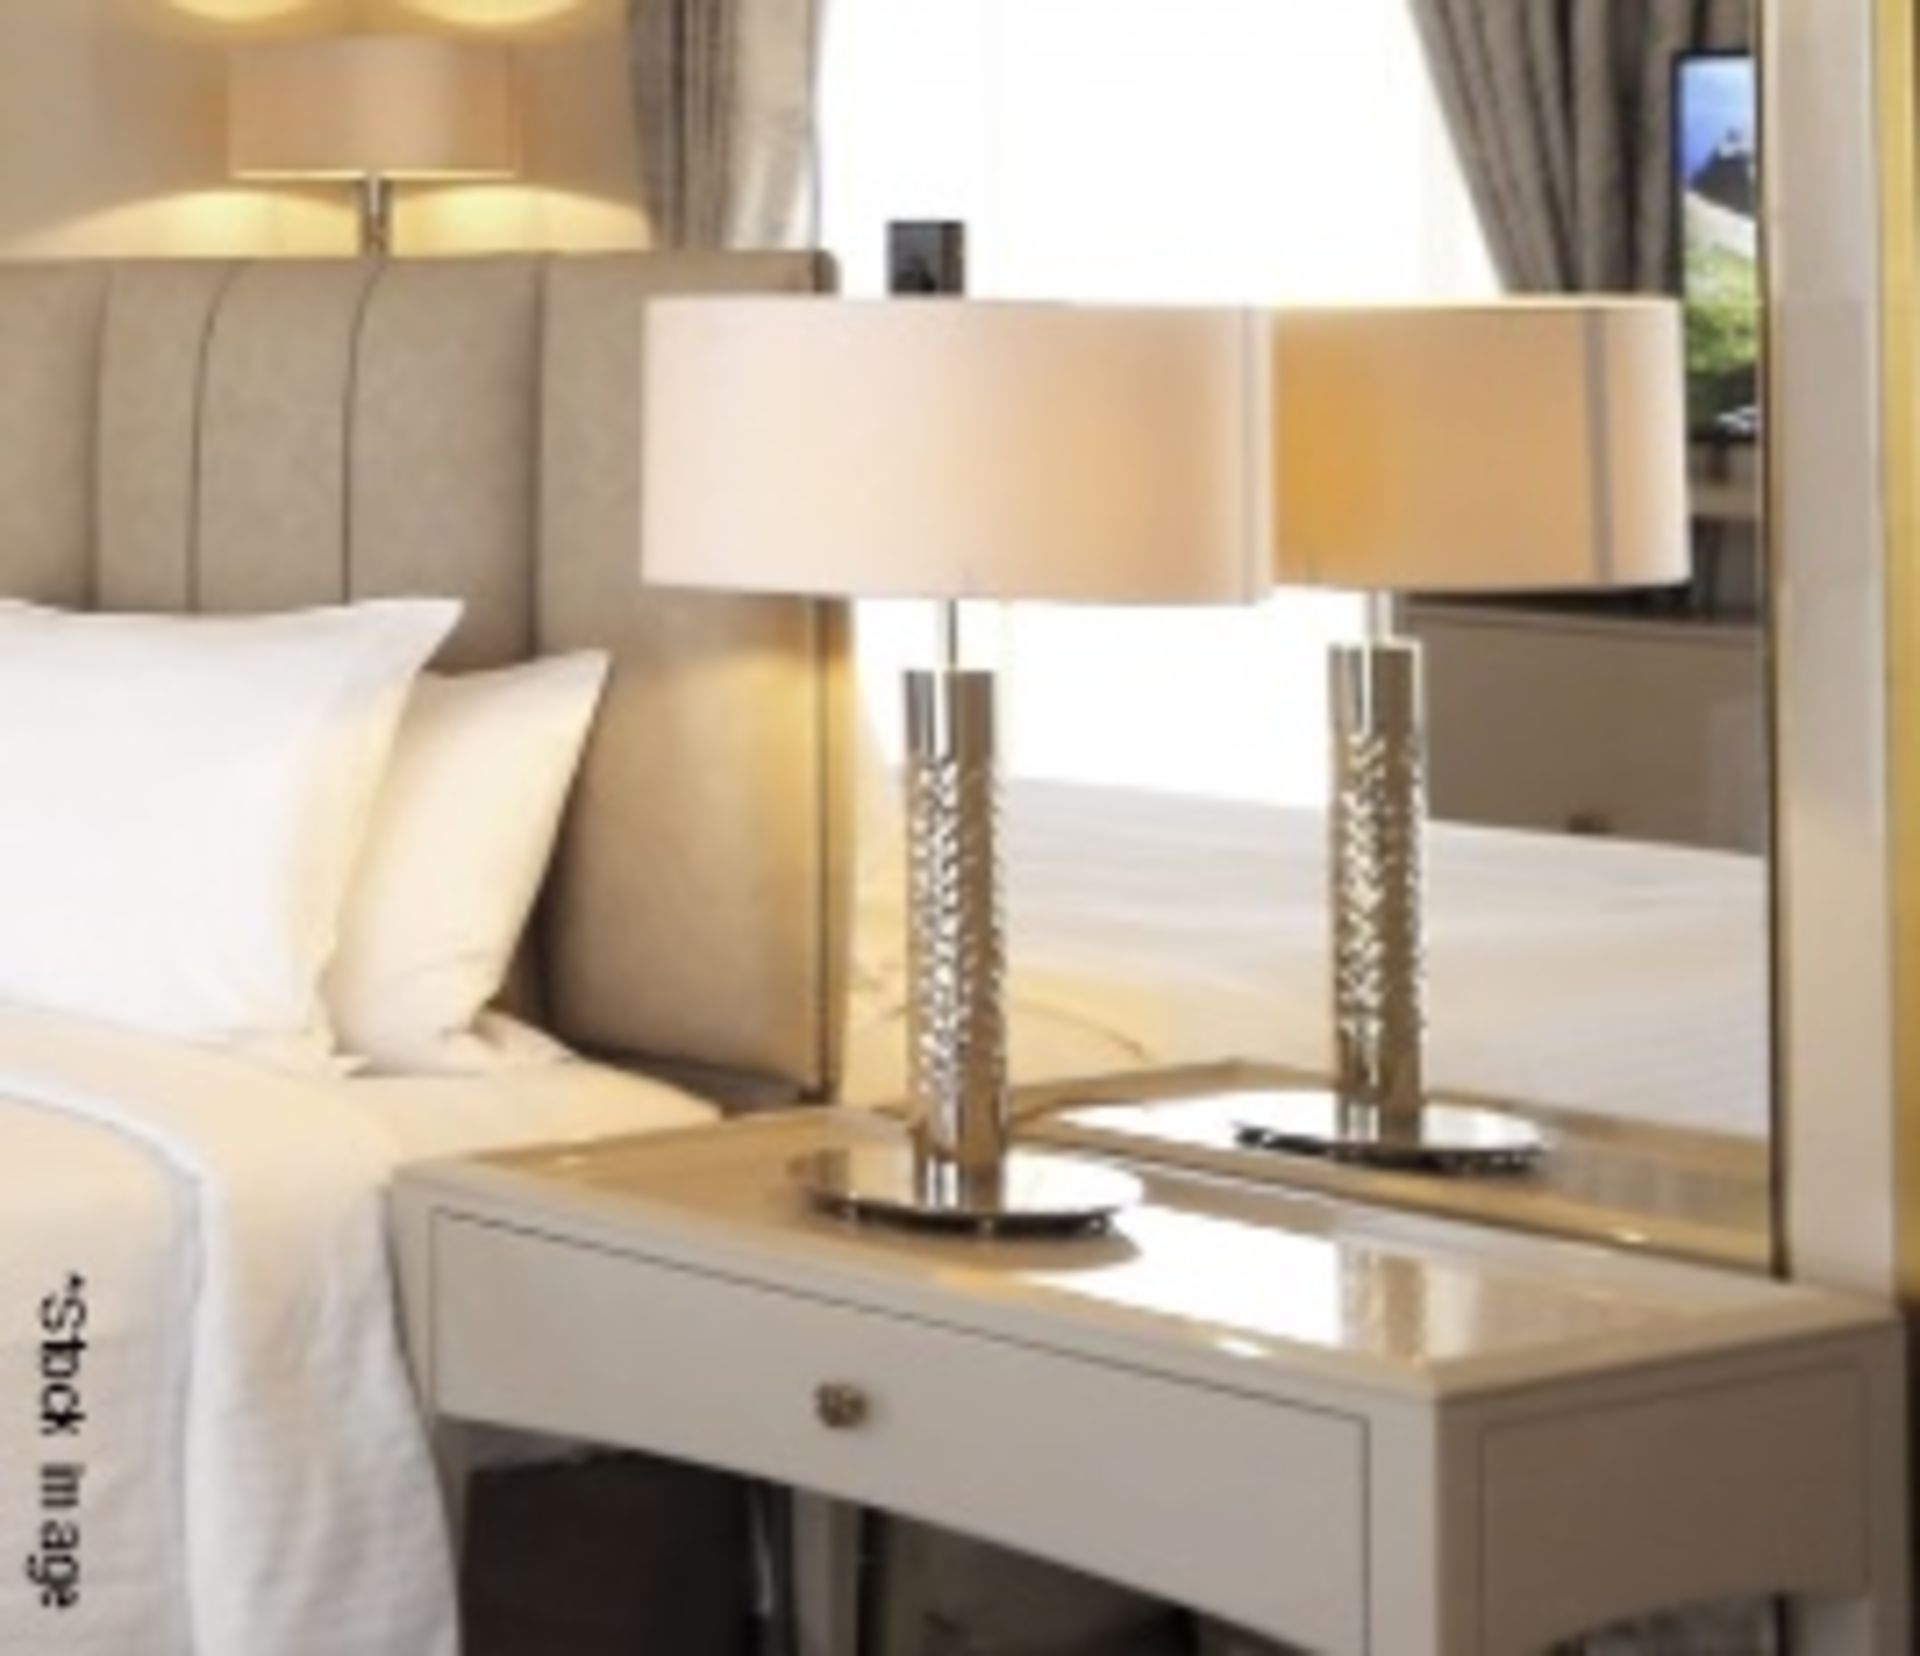 1 x CASTRO LIGHTING 'Safi' Opulent 24k Gold Plated Table Lamp with Silk Shade - Original Price £450